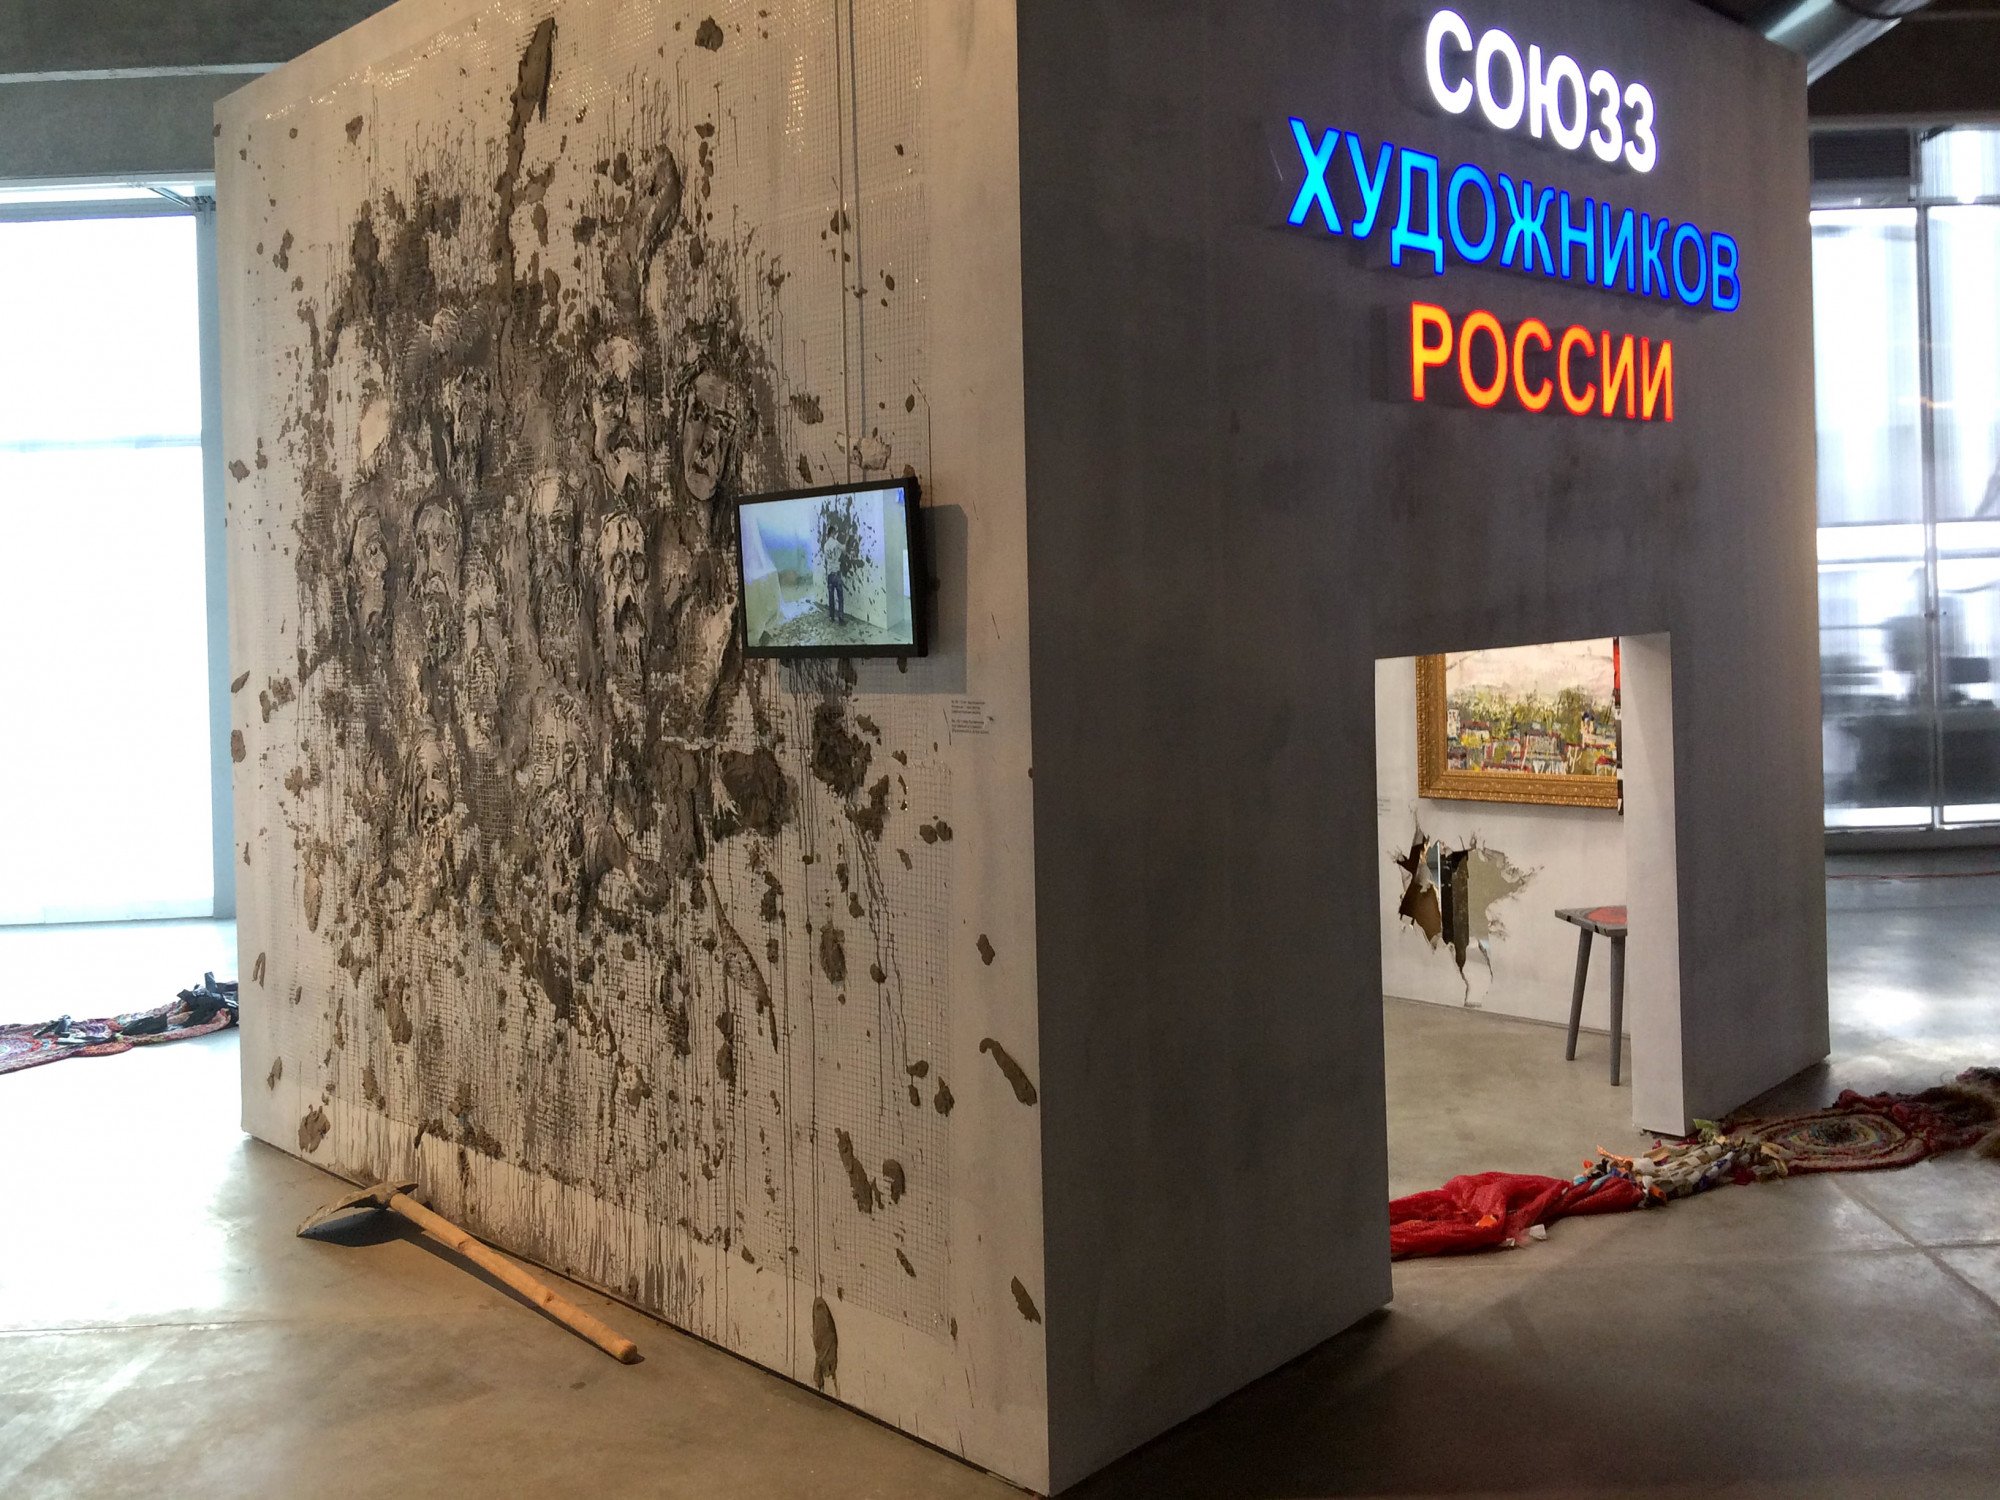 33+1 pavilion at the 1st Triennial of Russian Art, Garage MCA, Moscow, 2017